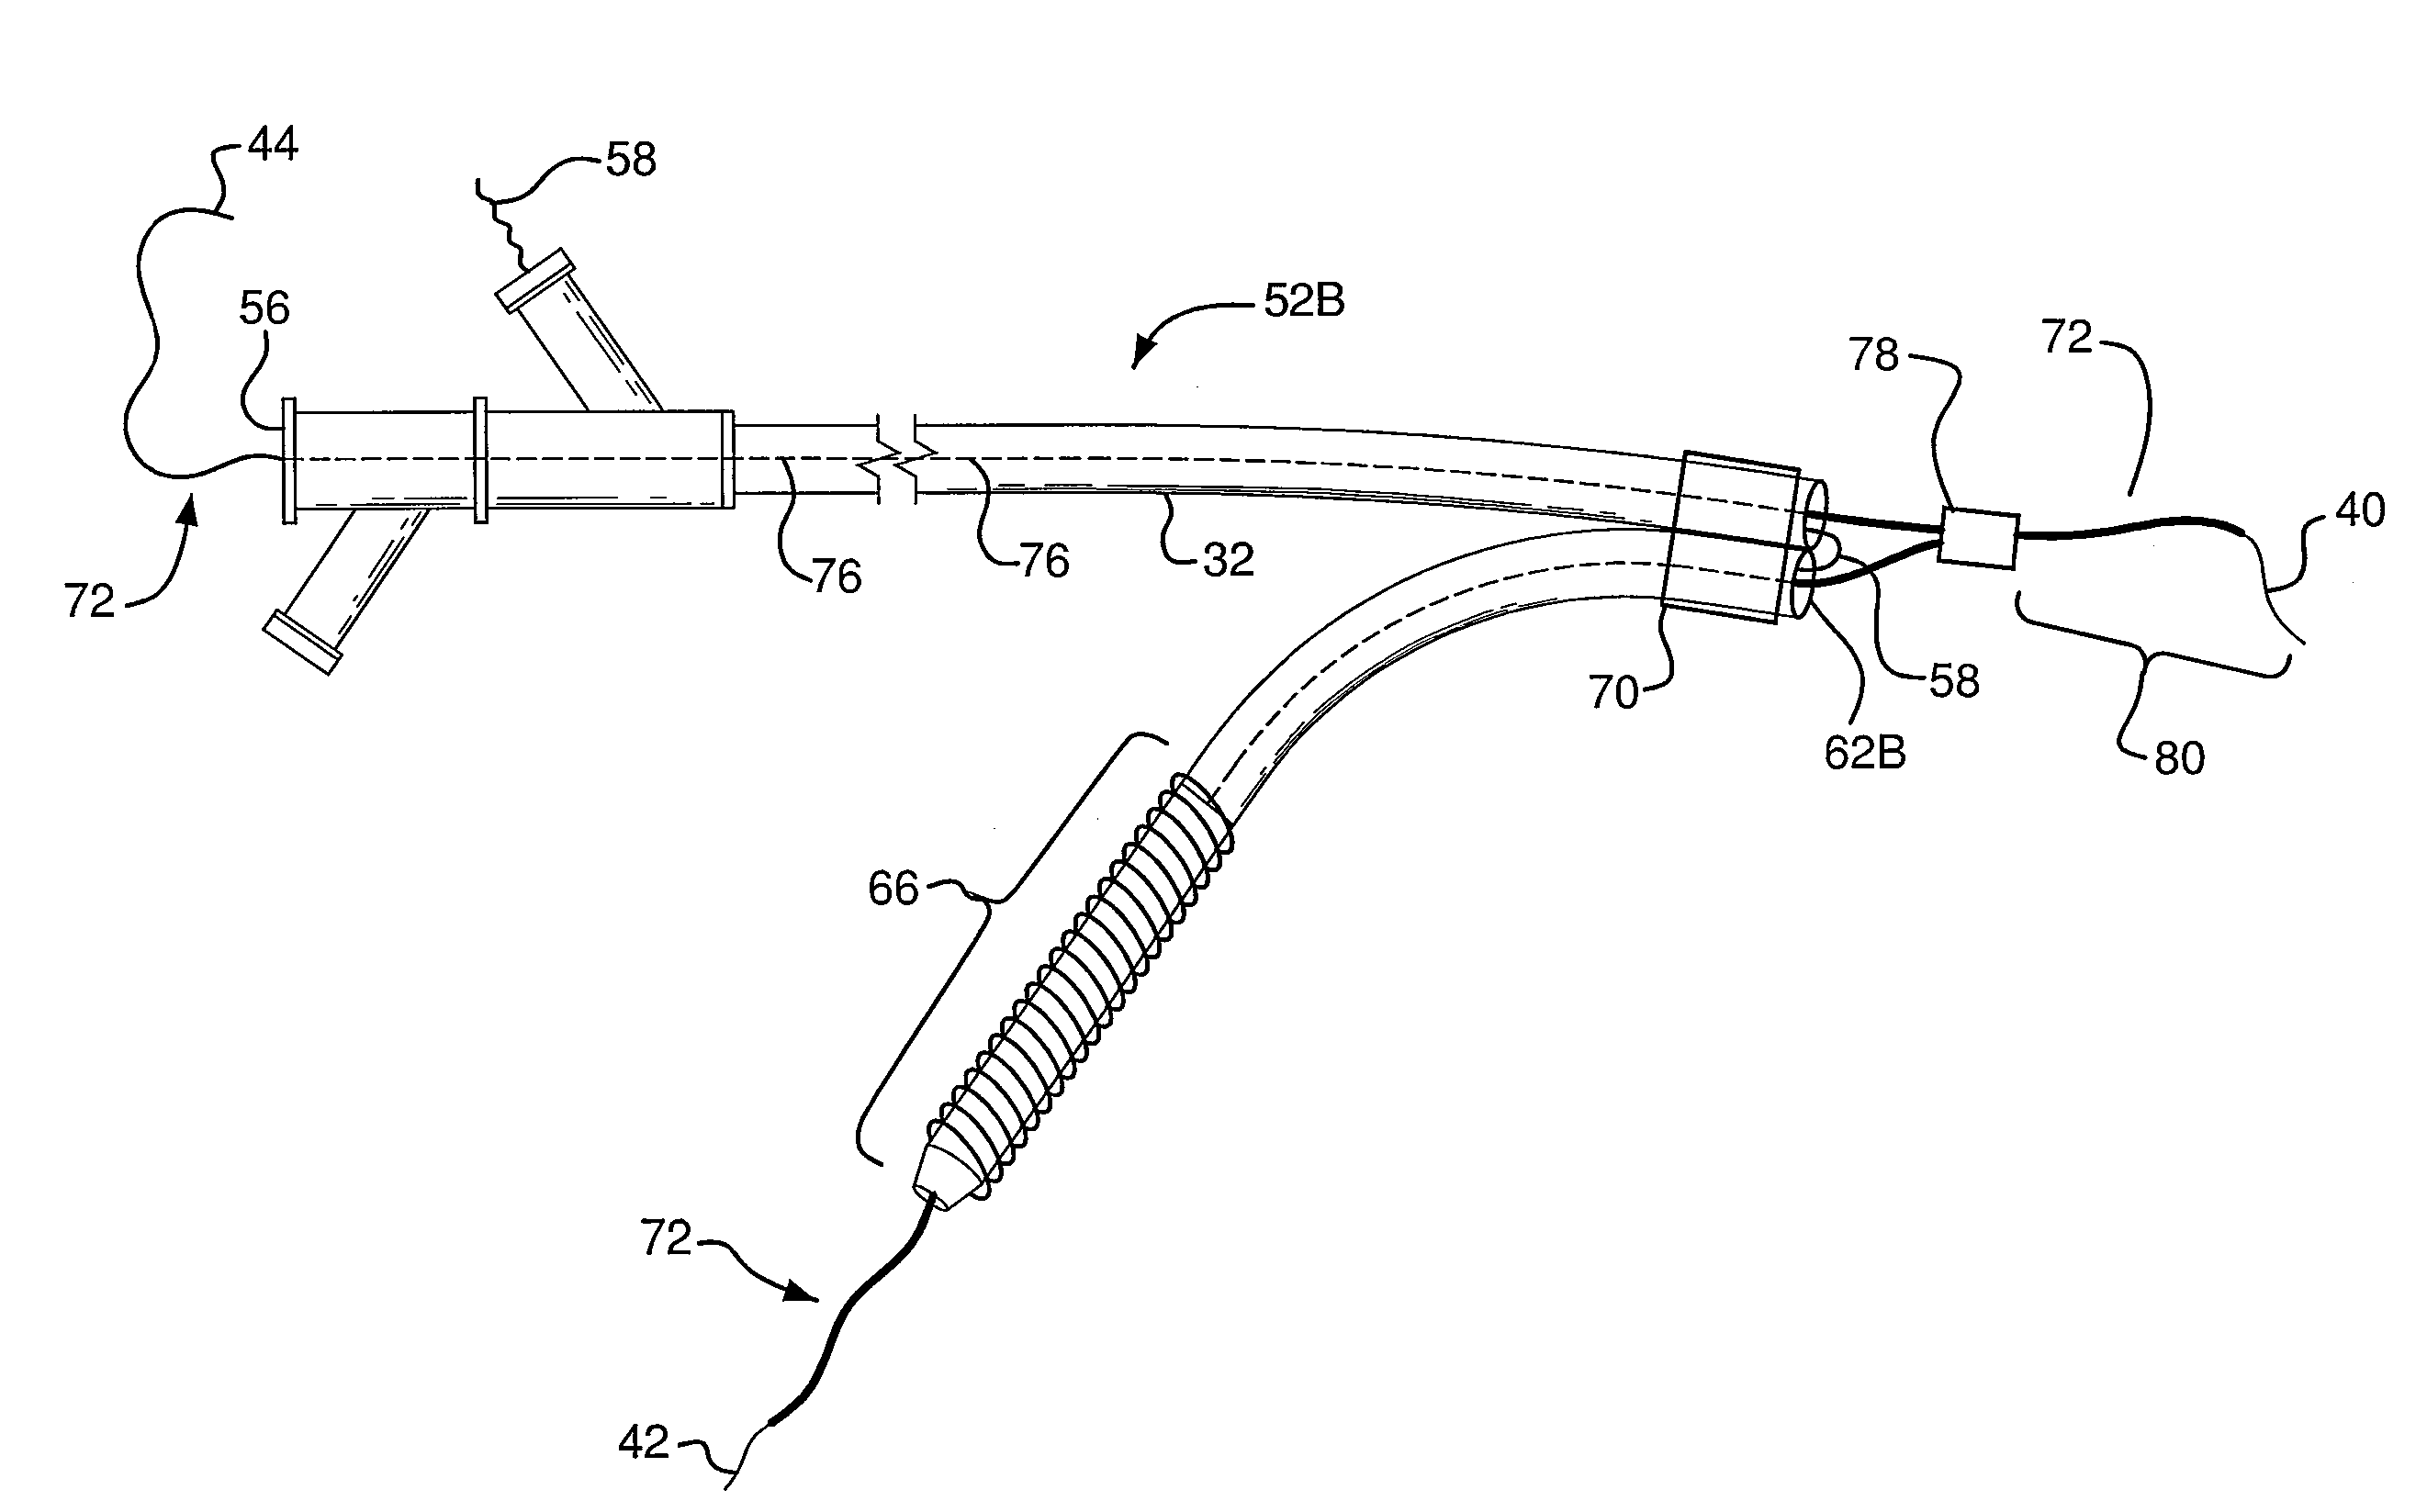 Branched stent delivery system